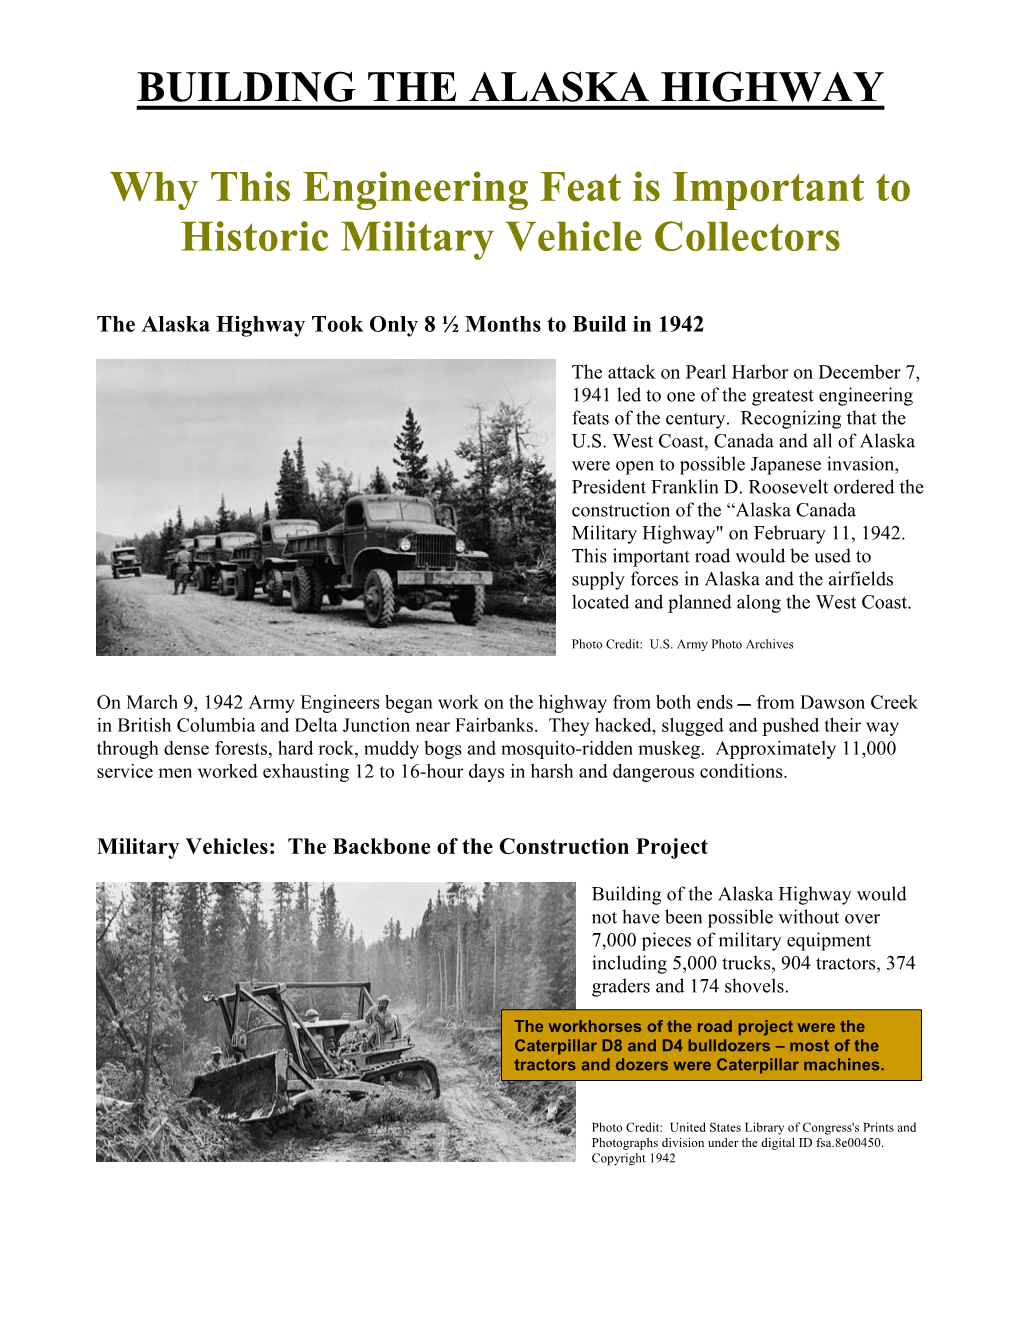 BUILDING the ALASKA HIGHWAY Why This Engineering Feat Is Important to Historic Military Vehicle Collectors